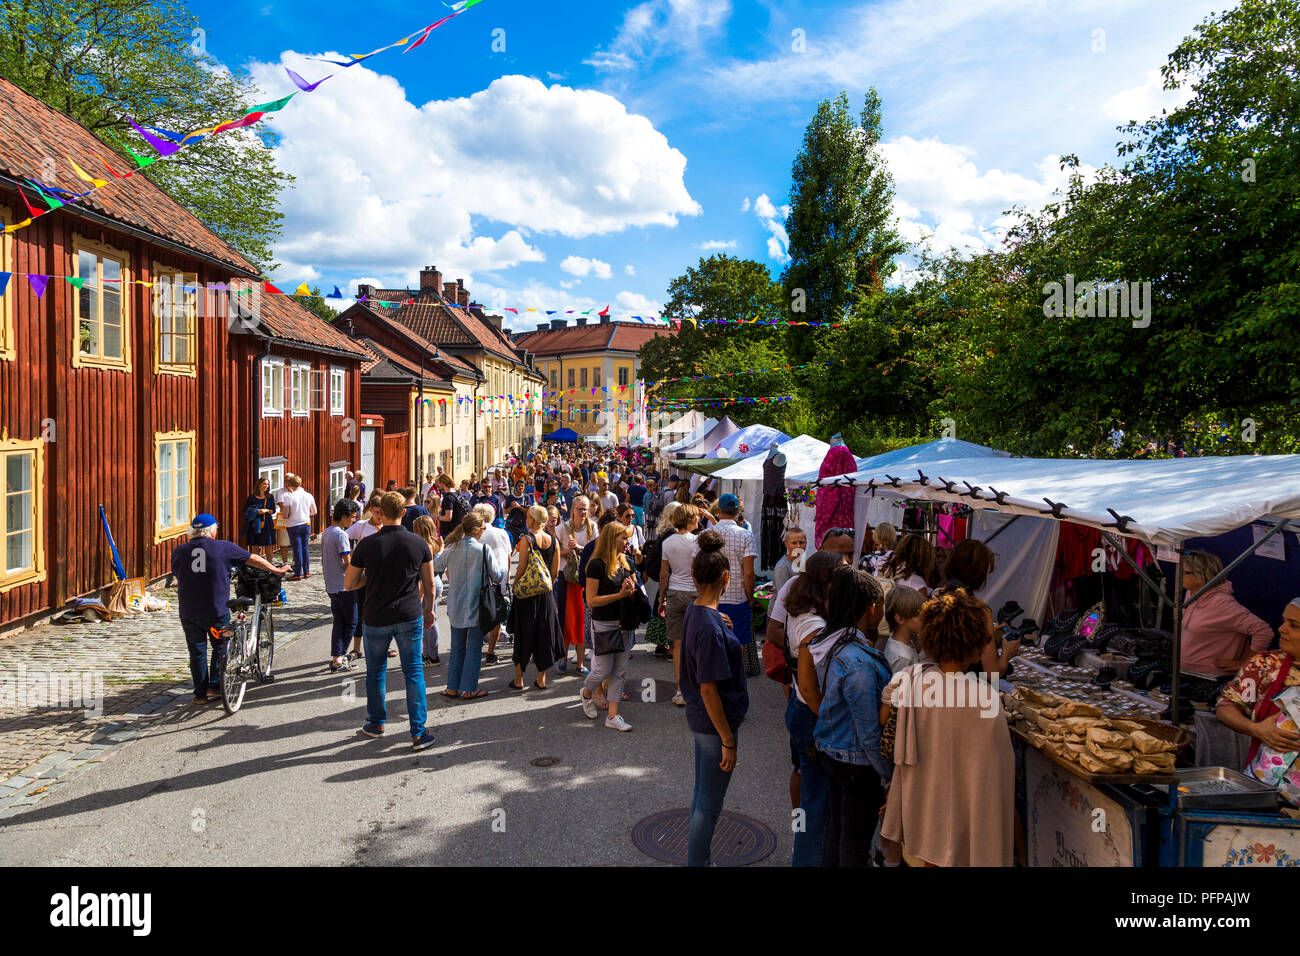 Crowds of people and traditional Swedish houses at street market festival at Nytorget, Sodermalm, Stockholm, Sweden (Nytorgsfesten 18th August 2018) Stock Photo